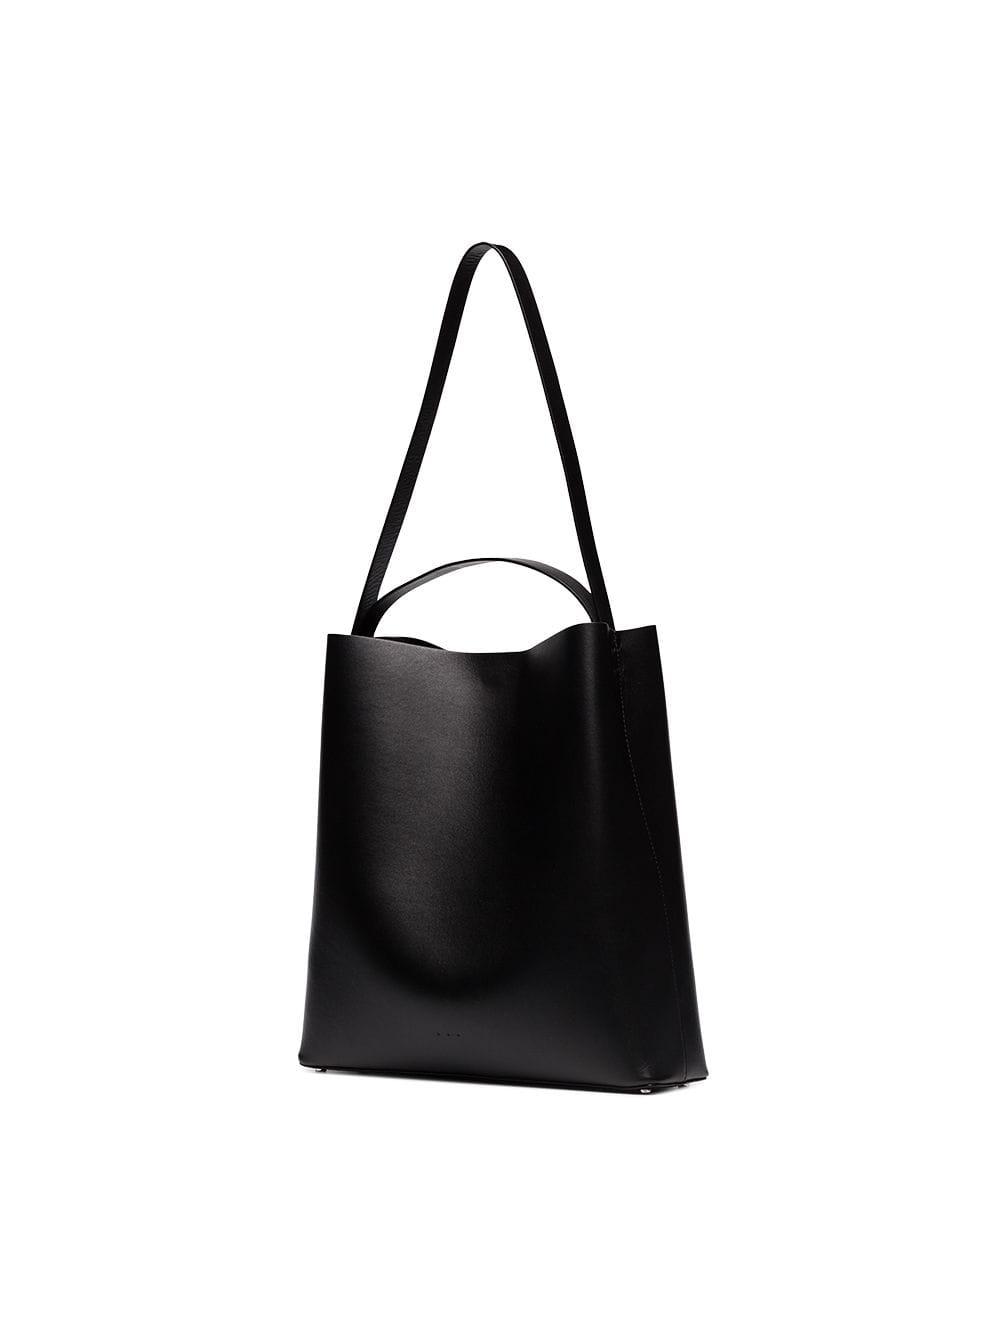 Aesther Ekme Leather Sac Tote Bag in Black - Lyst